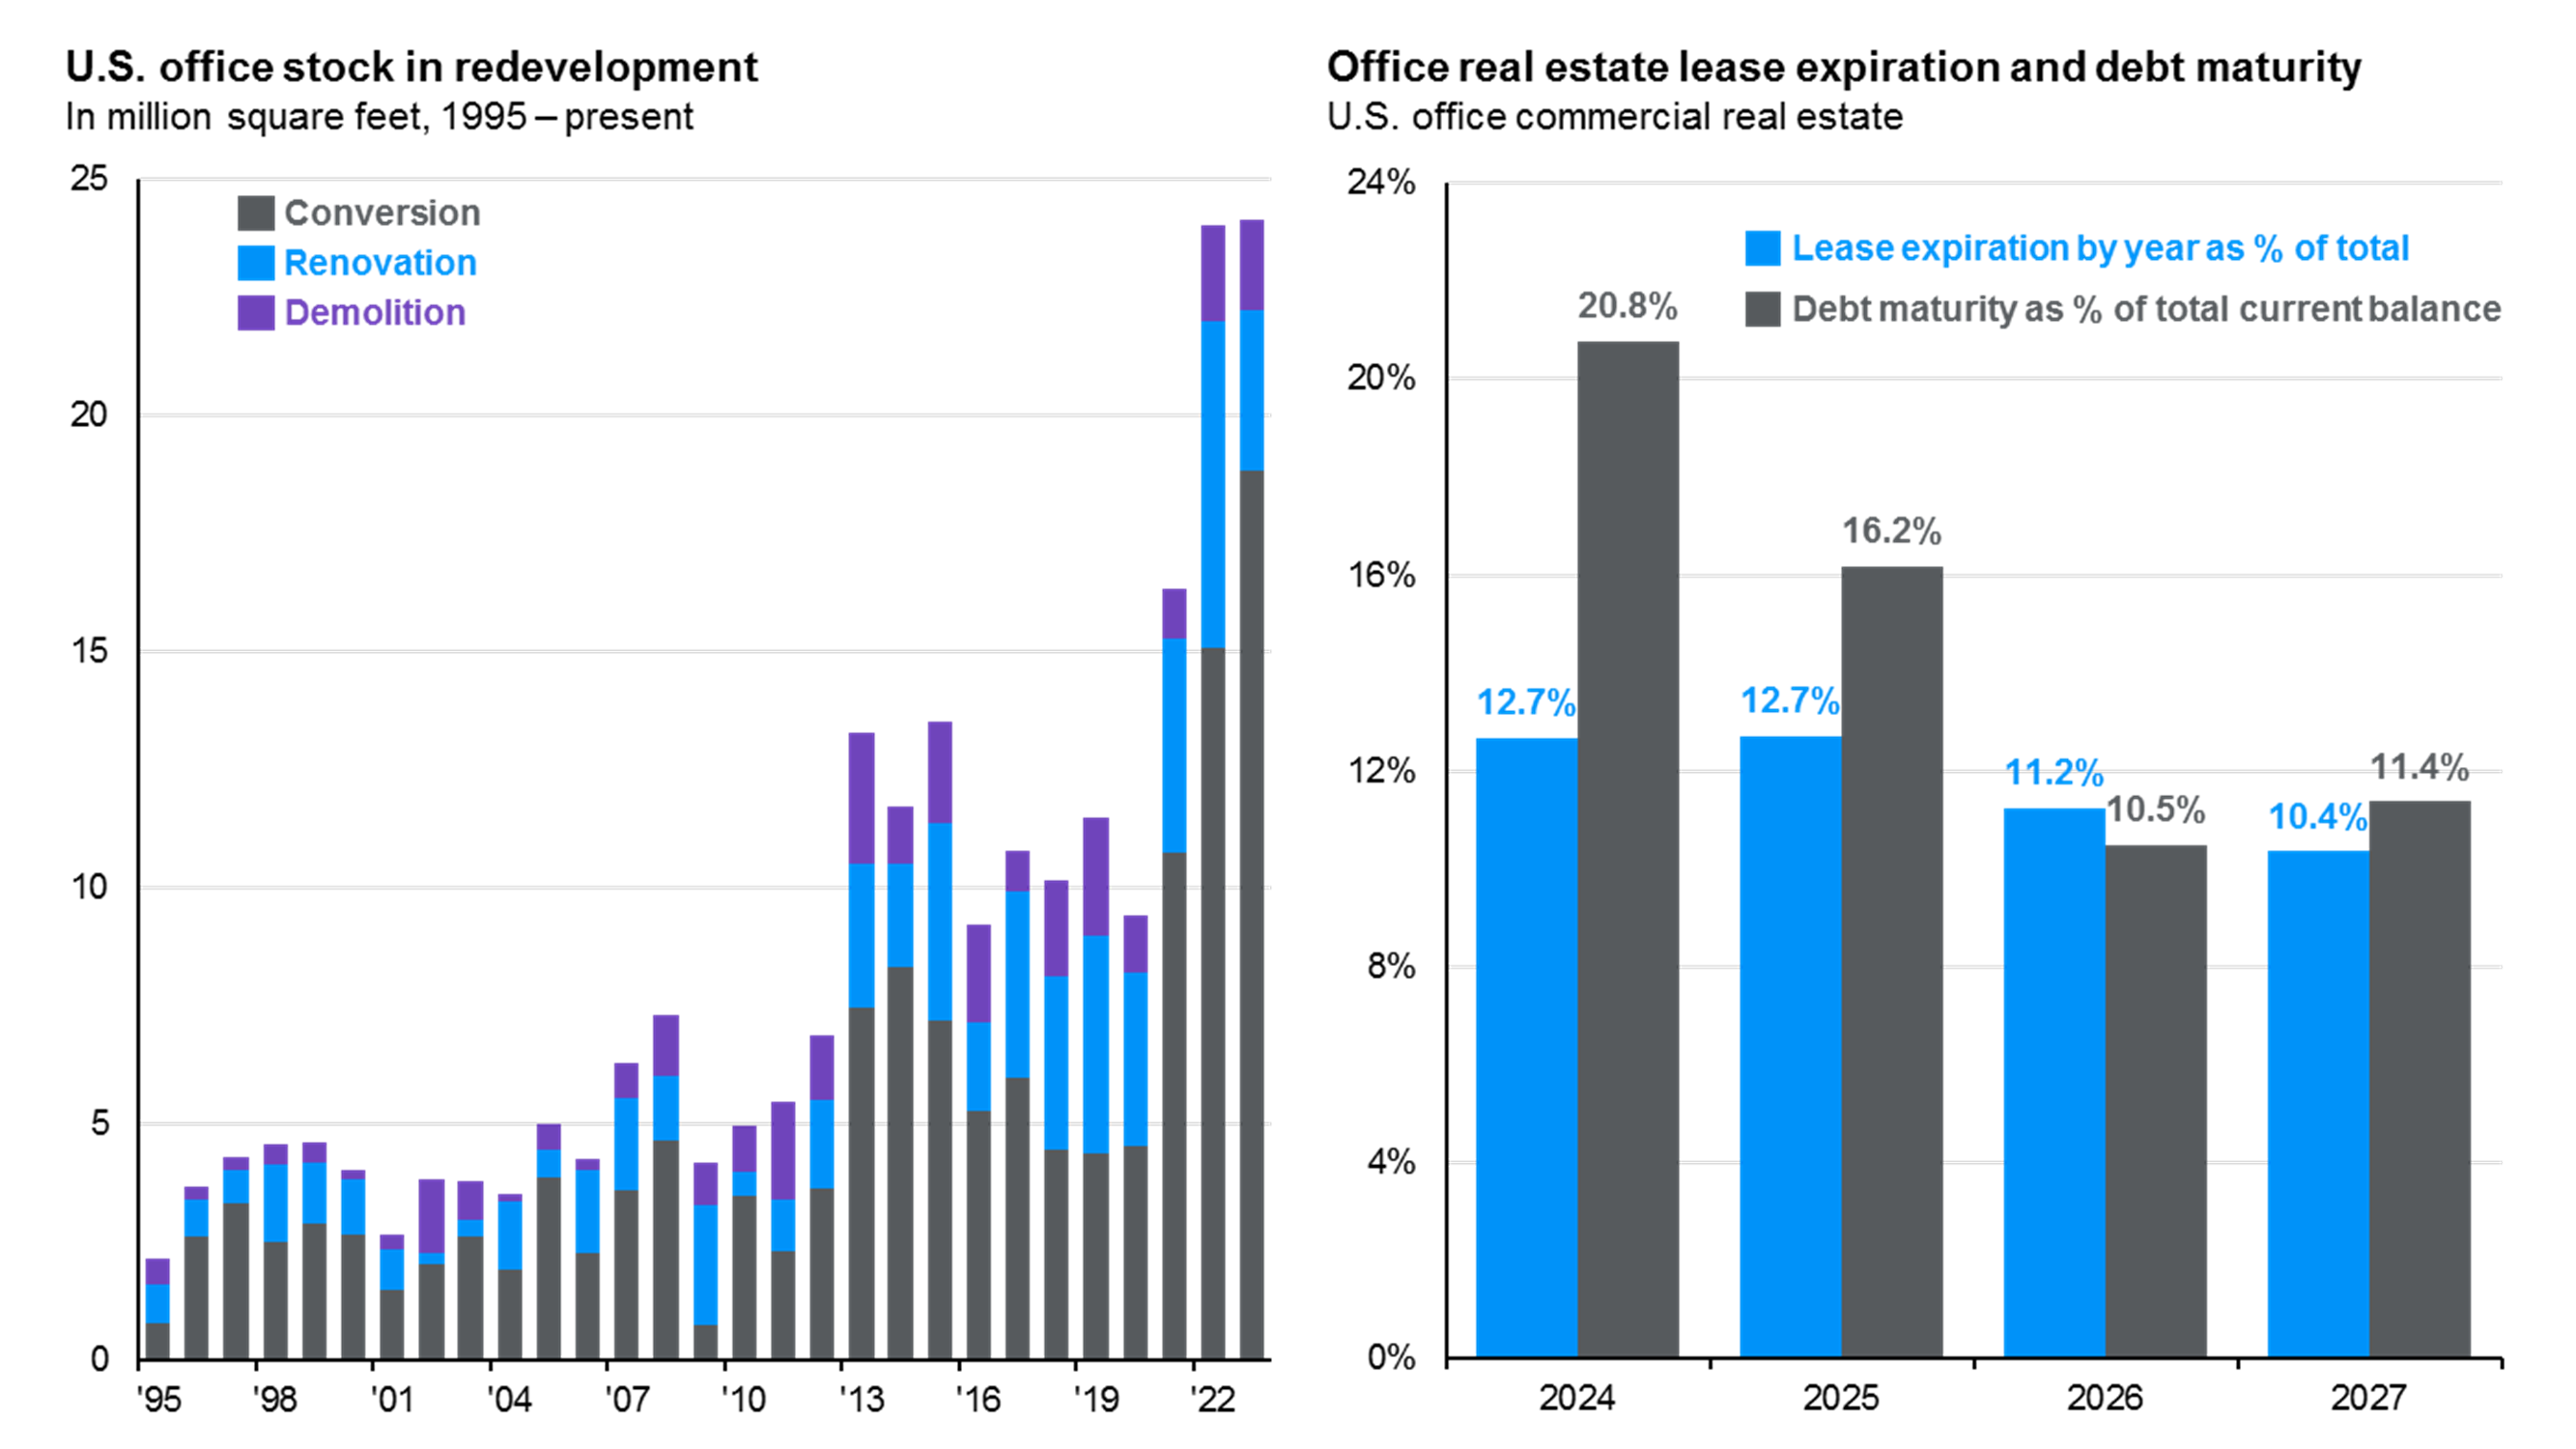 Europe real estate: Office vacancy rates